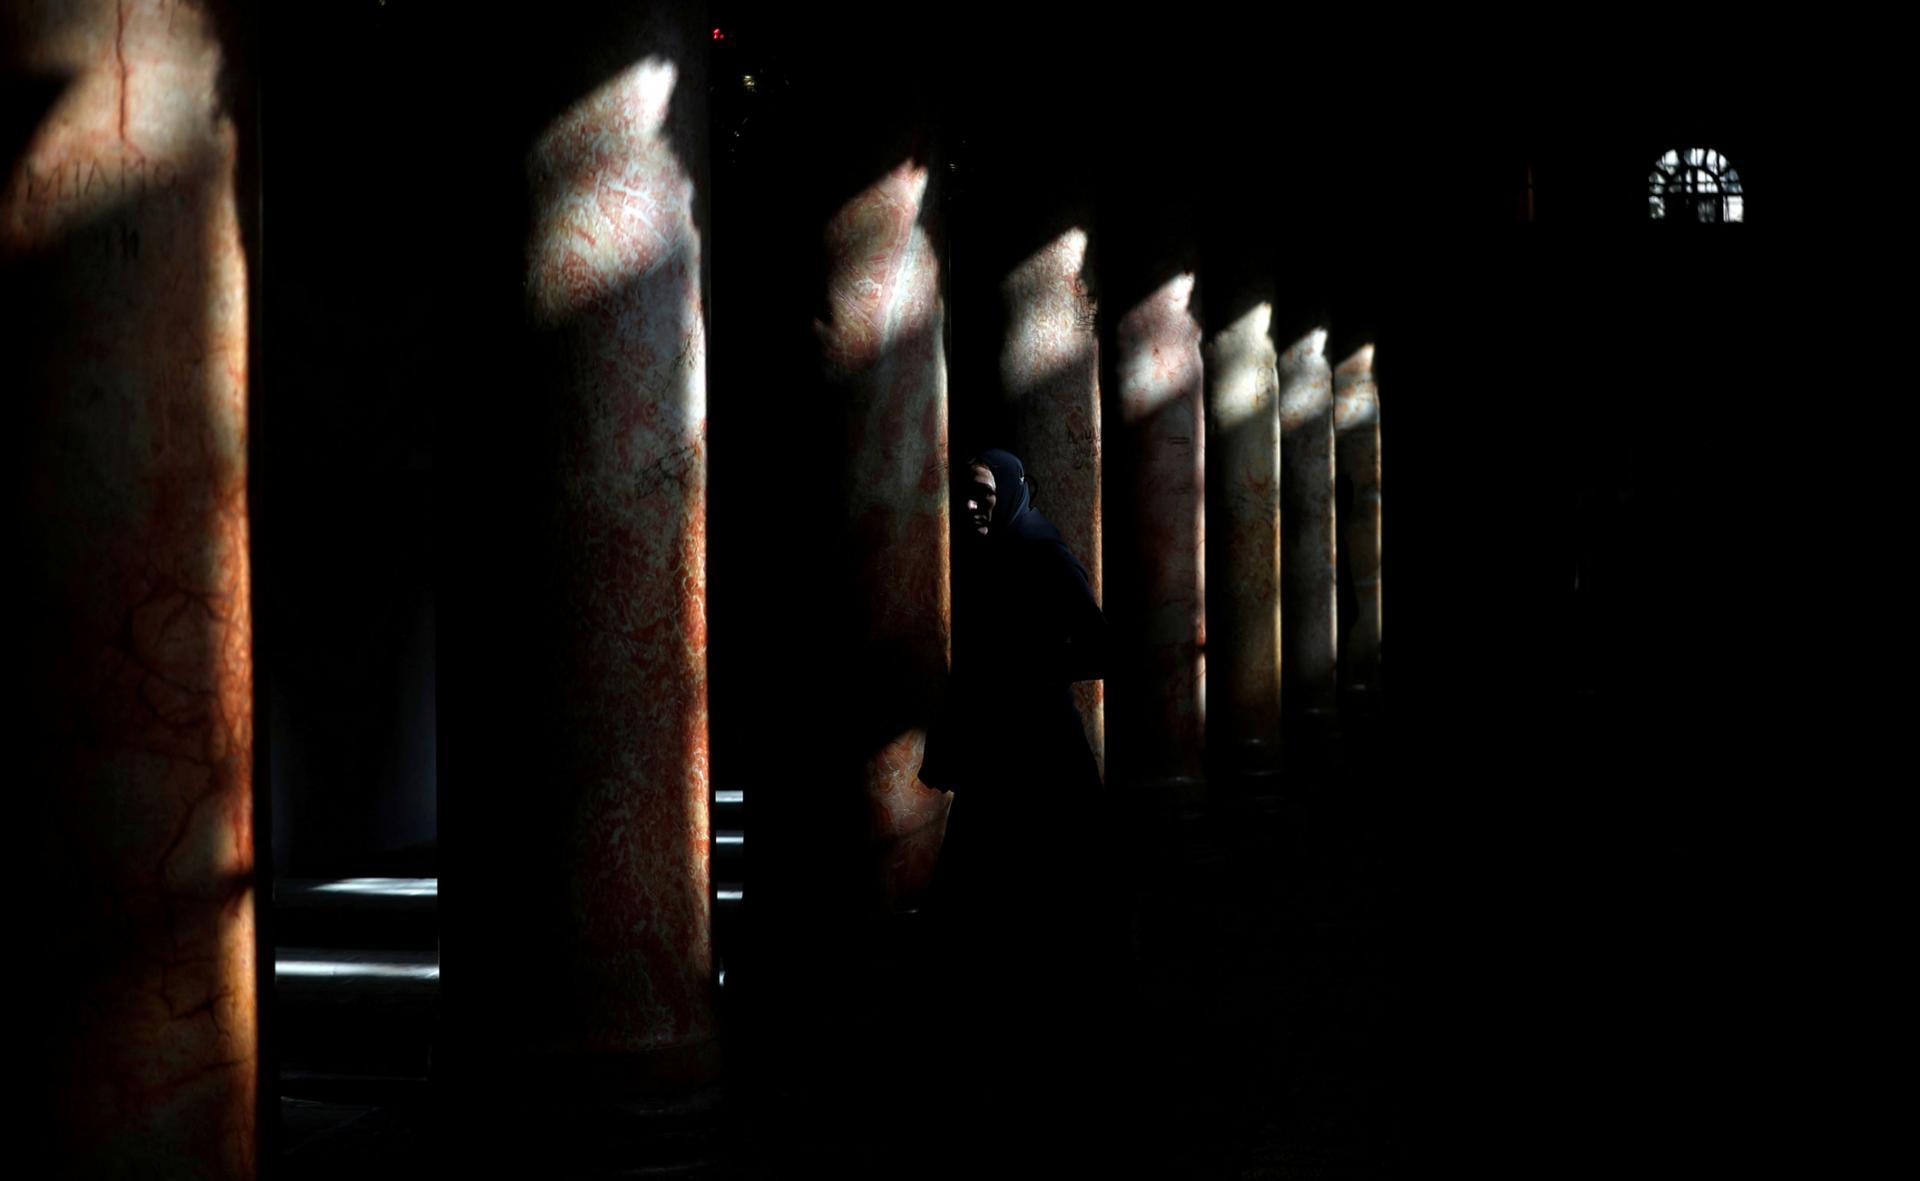 A worshipper is shown inside of the Church of the Nativity with very little light coming in and shinning on the tops of a row of marble columns.